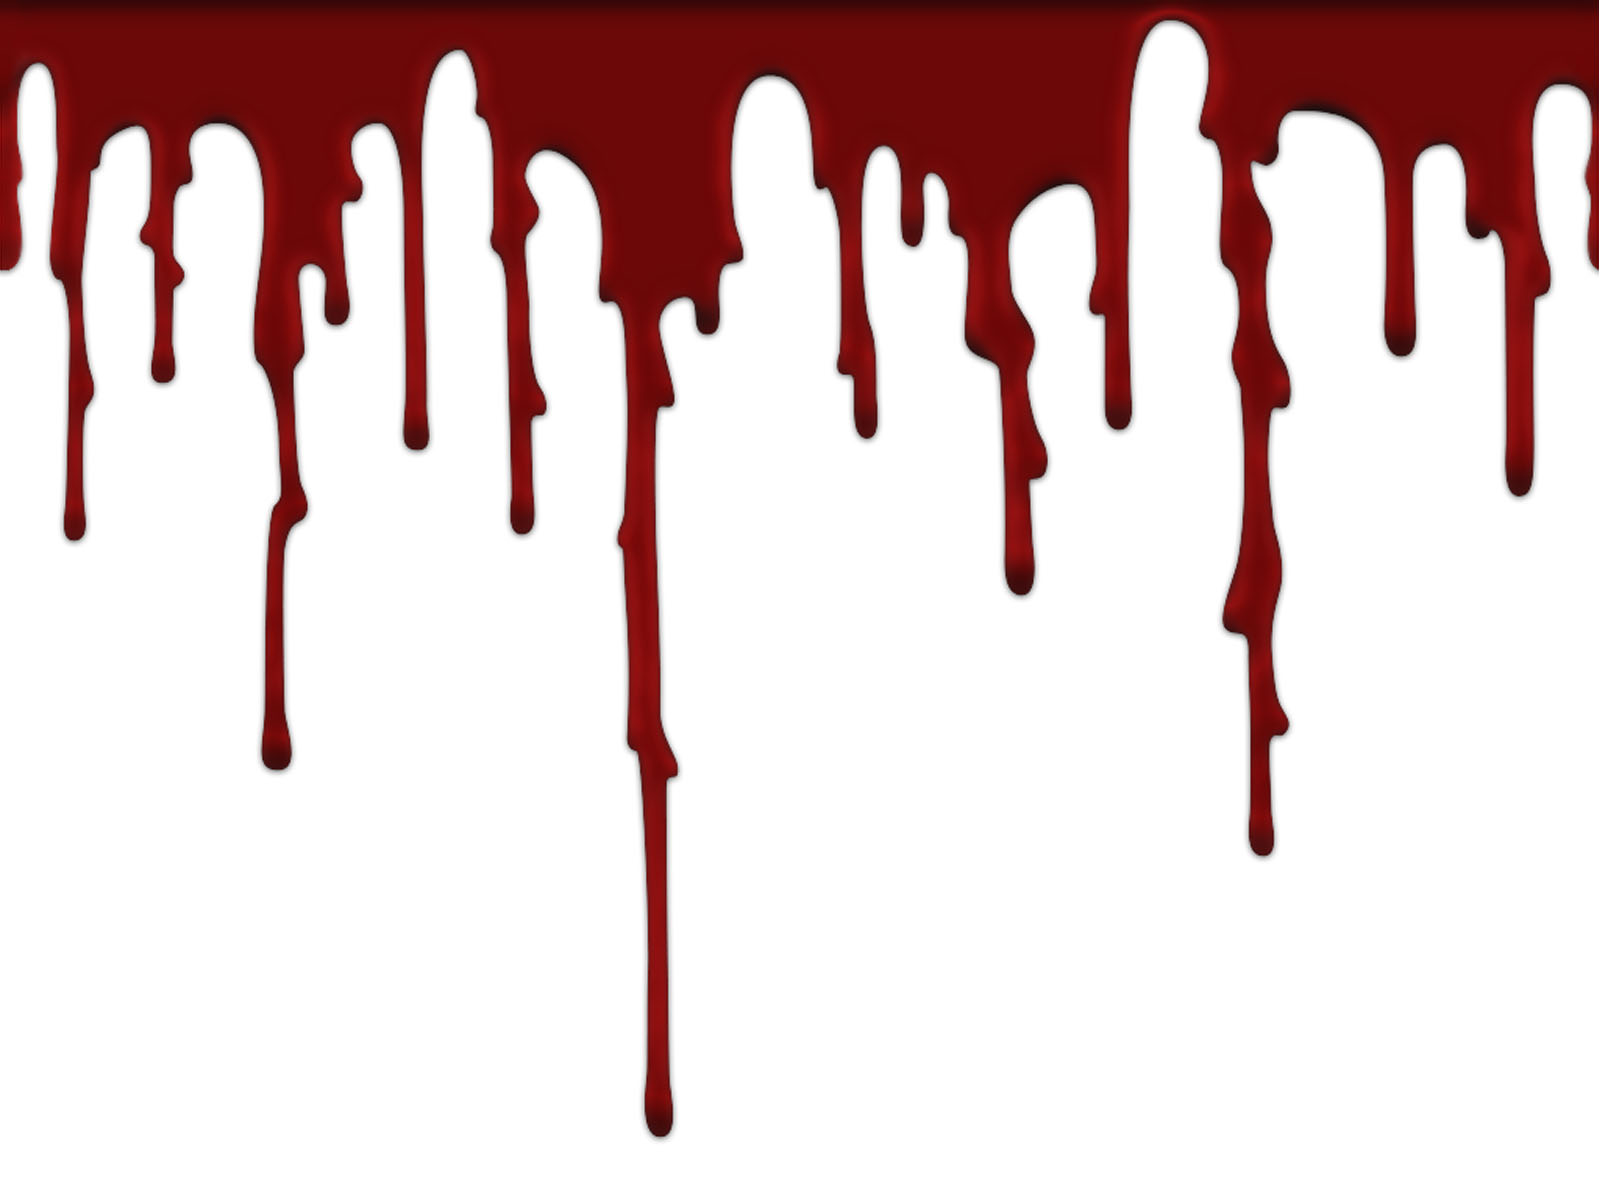 flowing blood background images